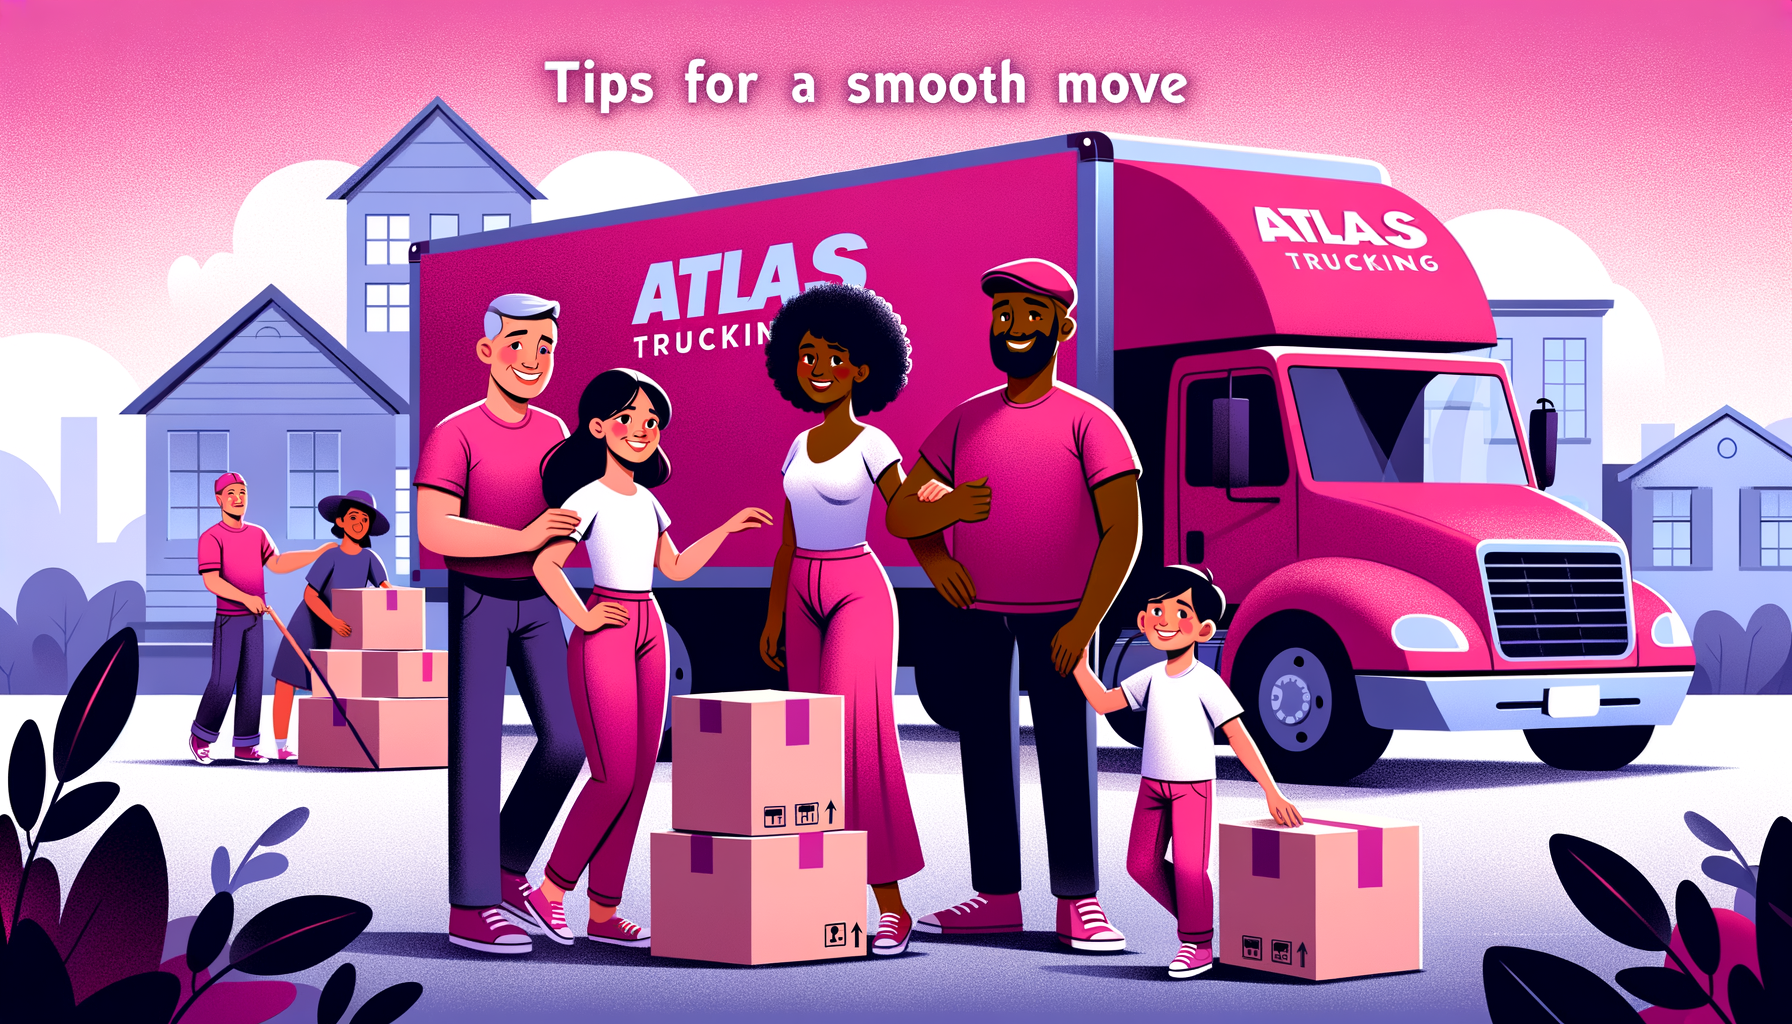 Cartoon illustration in fuschia of a happy family and movers with a truck labeled Atlas Van Lines, showcasing tips for a smooth move, including boxes and furniture arranged efficiently.